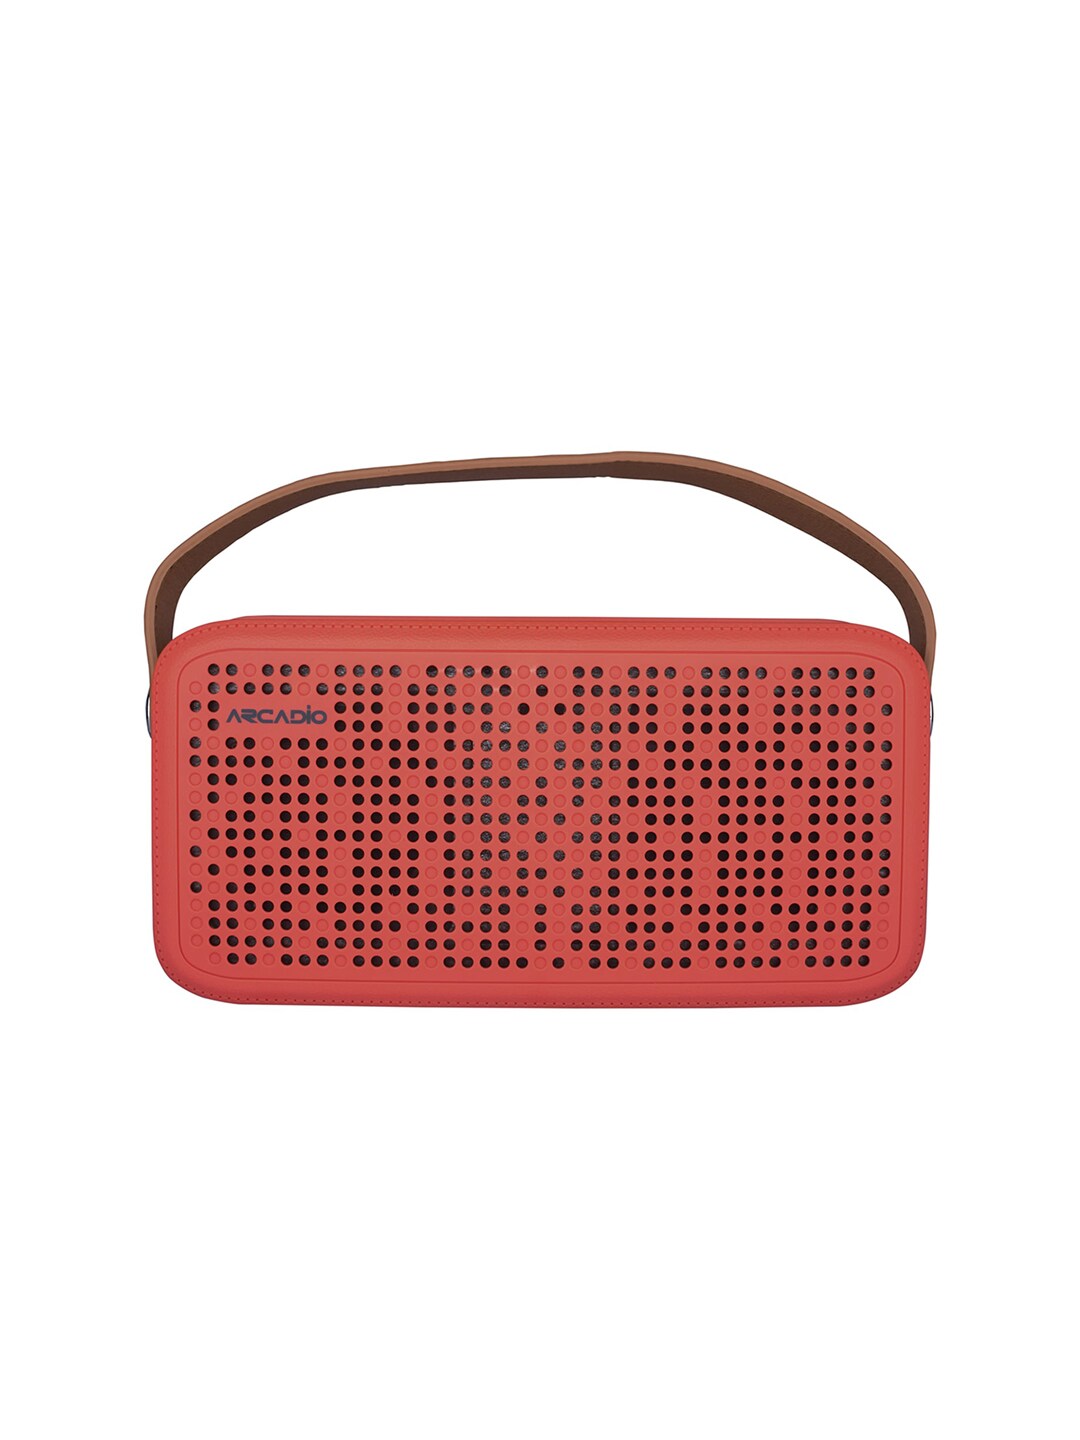 ARCADIO Red & Grey Portable Wireless Bluetooth Speaker Price in India